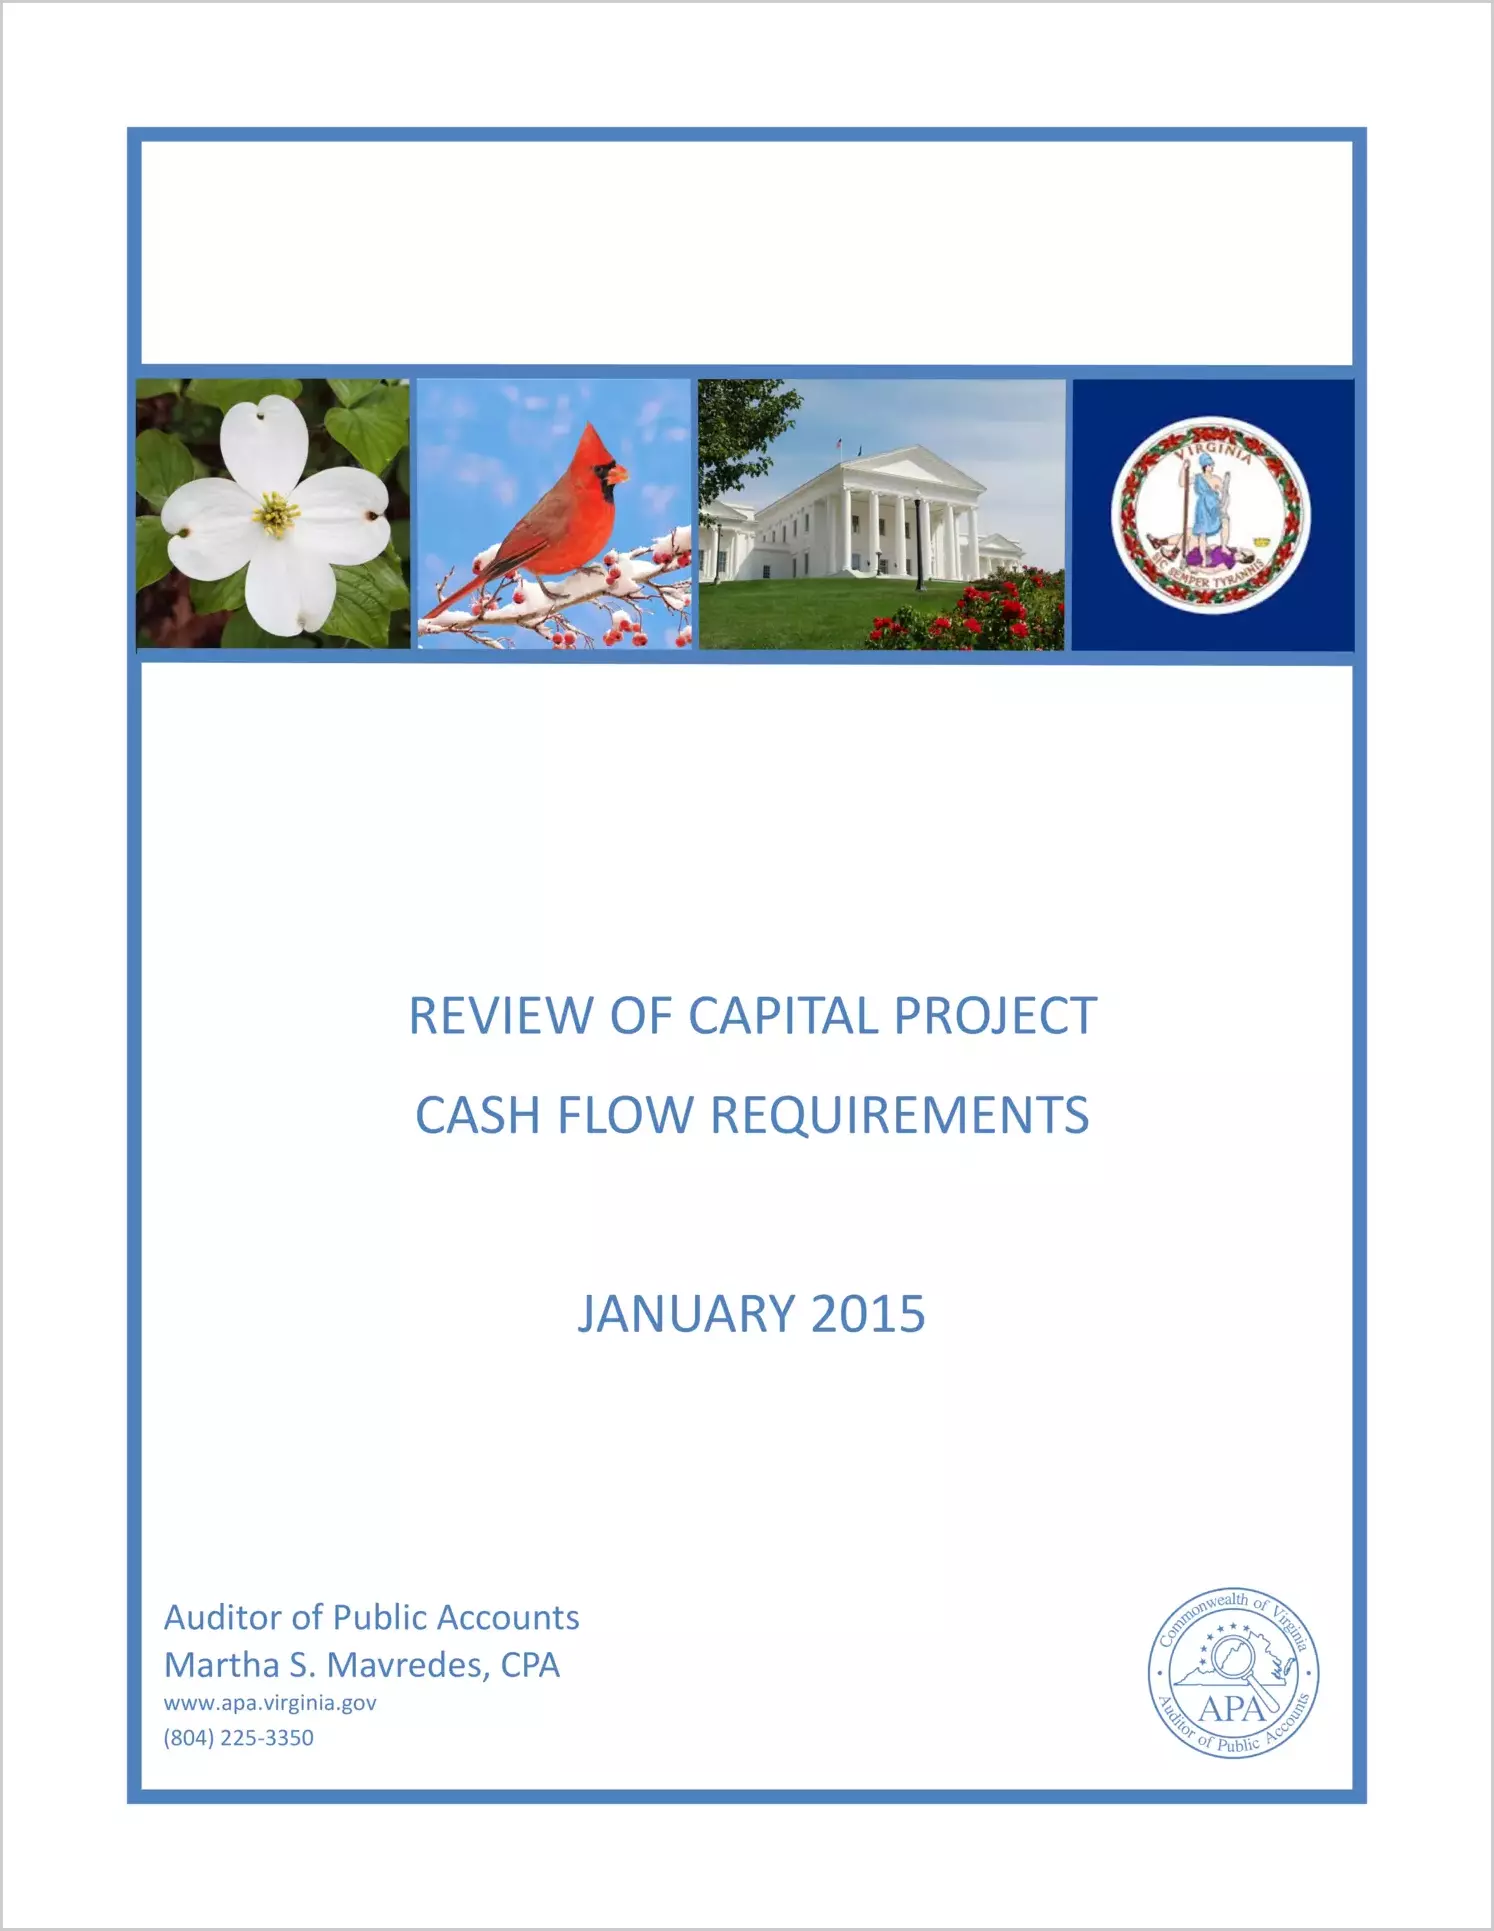 Review of Capital Project Cash Flow Requirements as of January 2015